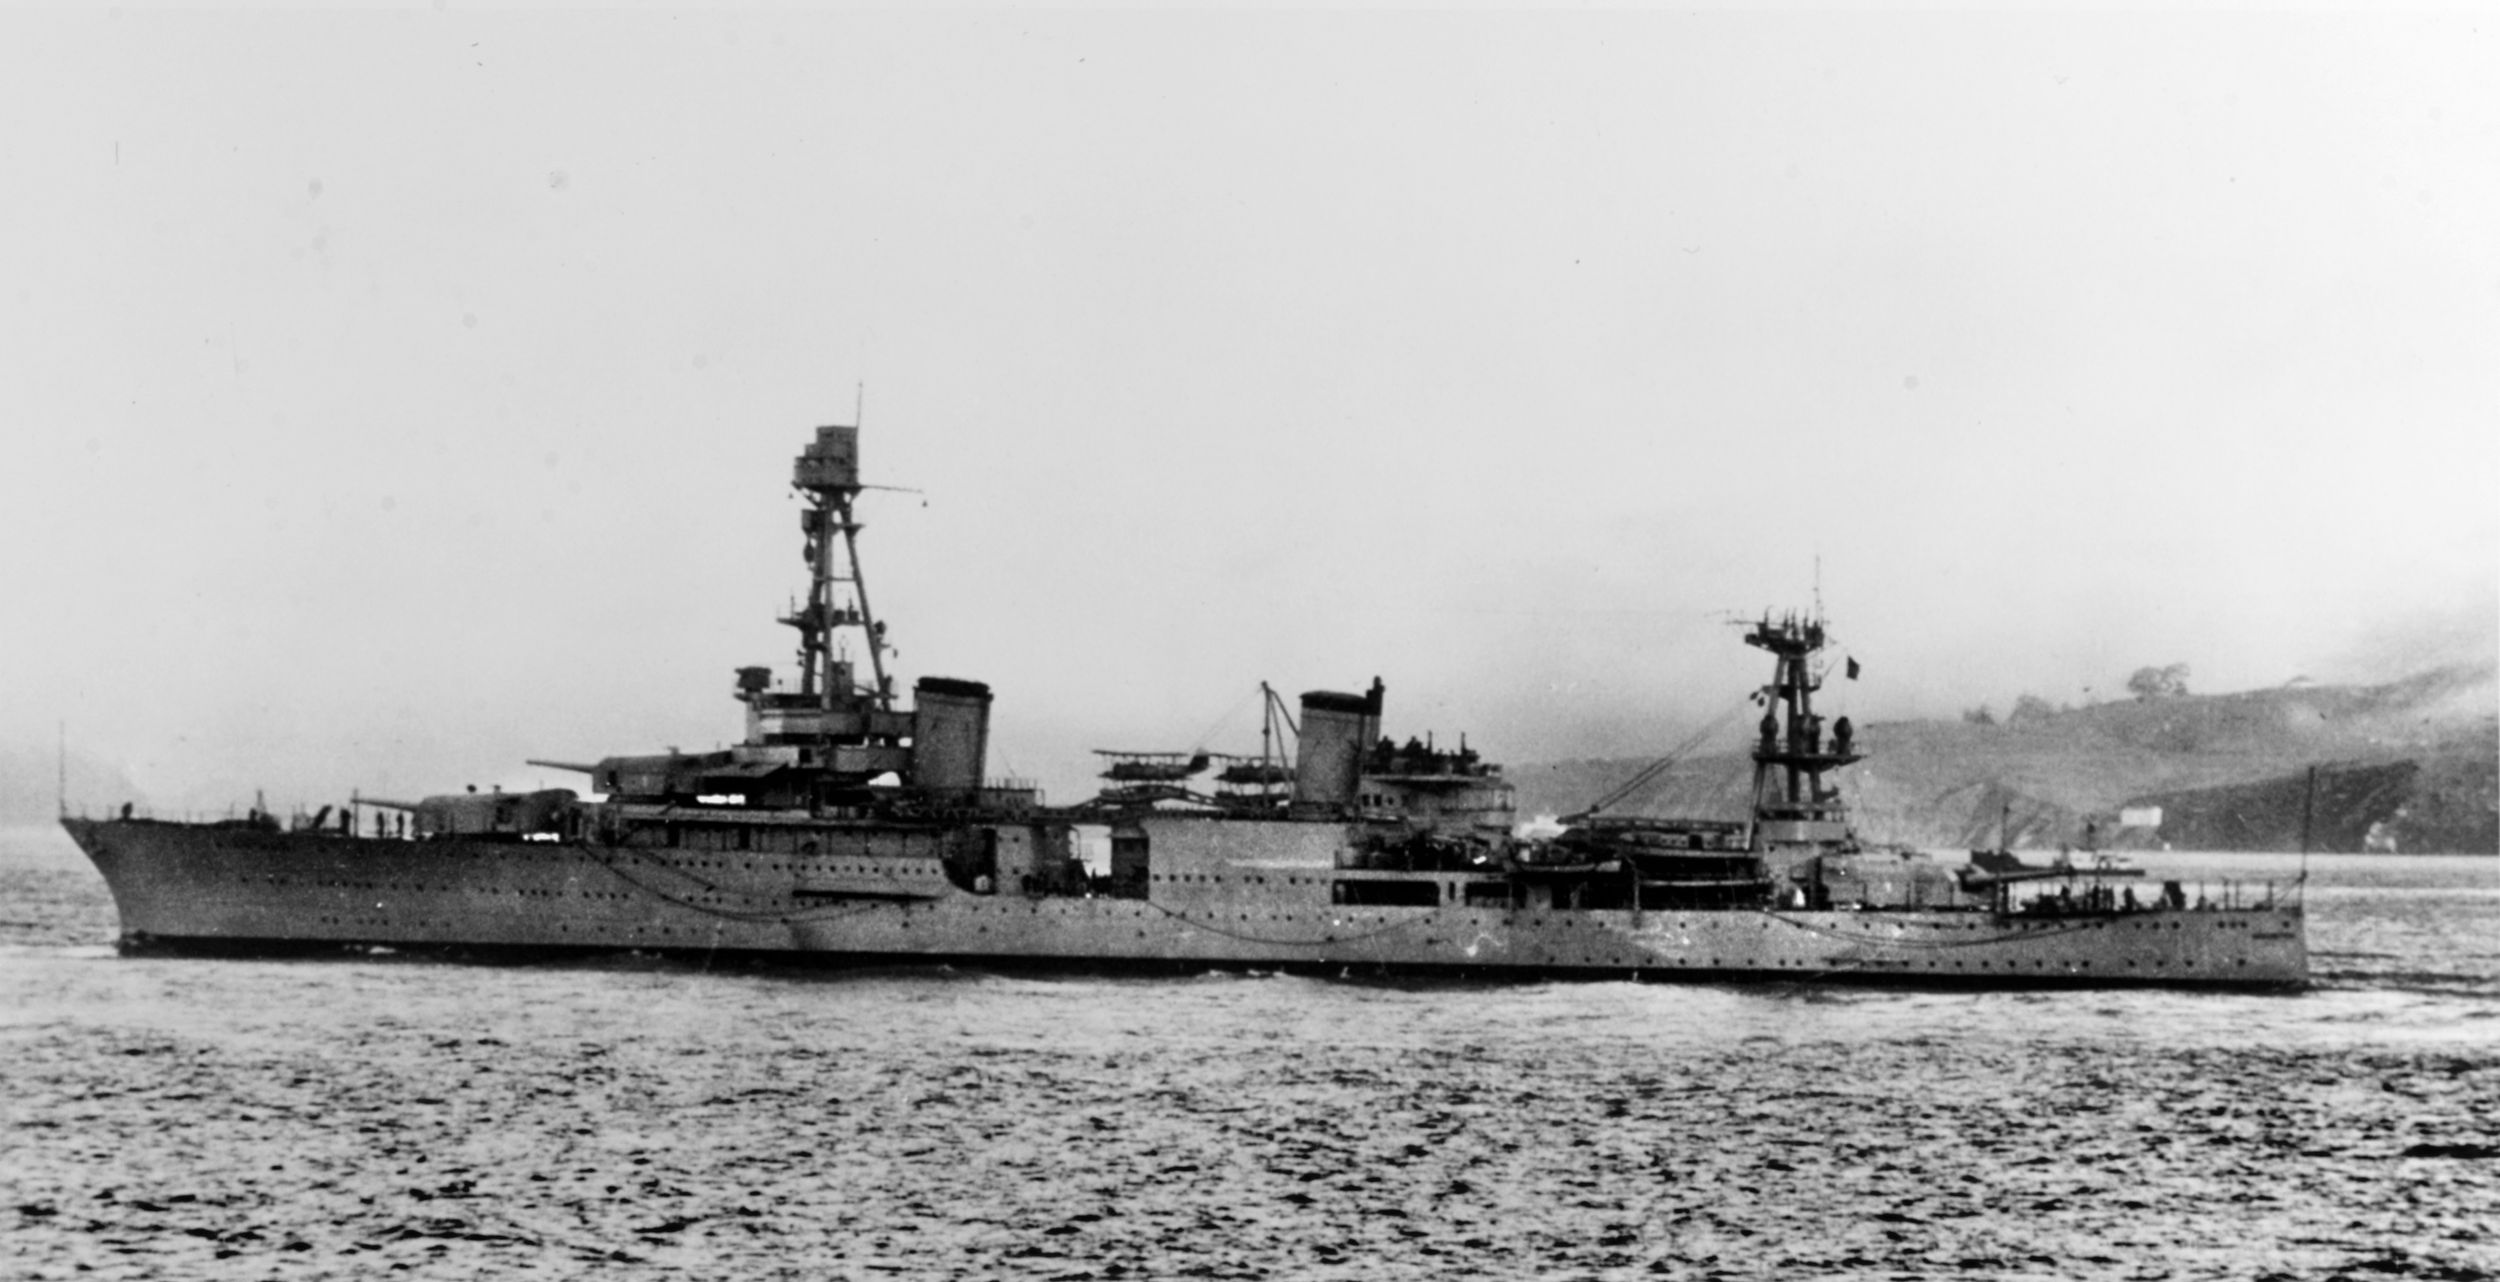 The USS Houston is seen in port at Tjilatjap, Java, on February 6, 1942.